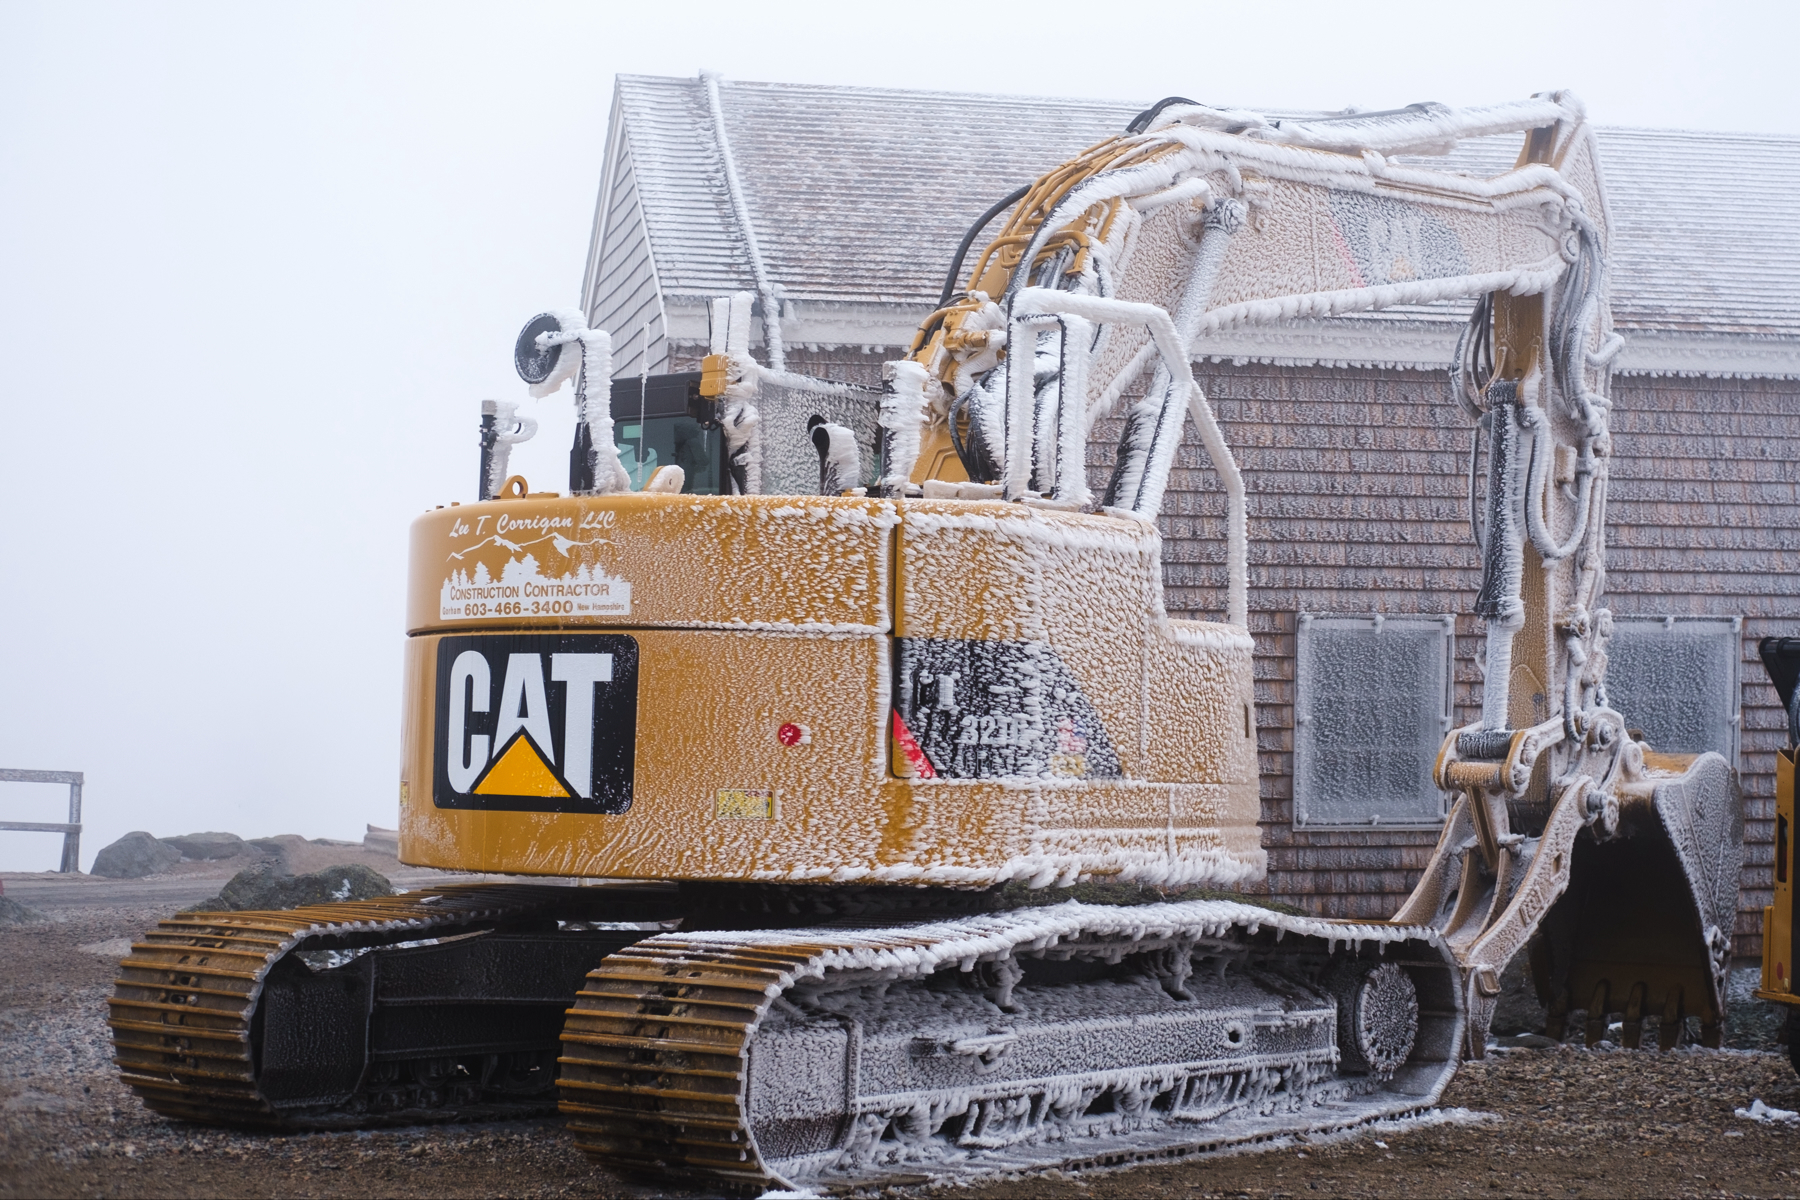 A frost-covered yellow Caterpillar (CAT) excavator next to an ice-encrusted building.